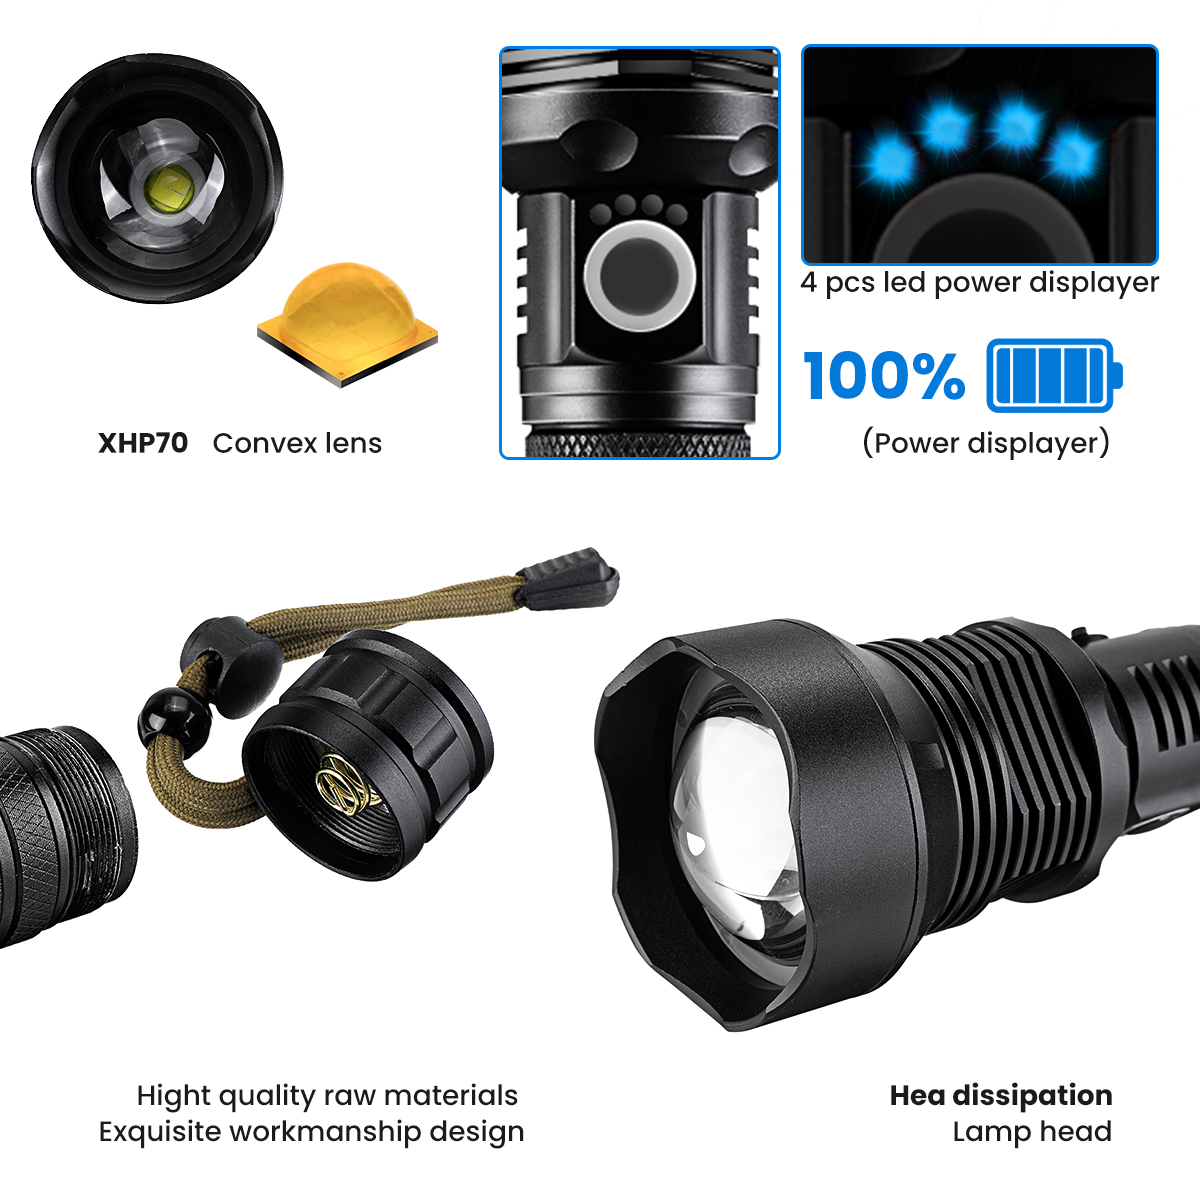 OUTERDO XHP70.2 90000 Lumens 26650 Battery LED Flashlight USB Rechargeable Outdoor Waterproof Tactical Flashlight